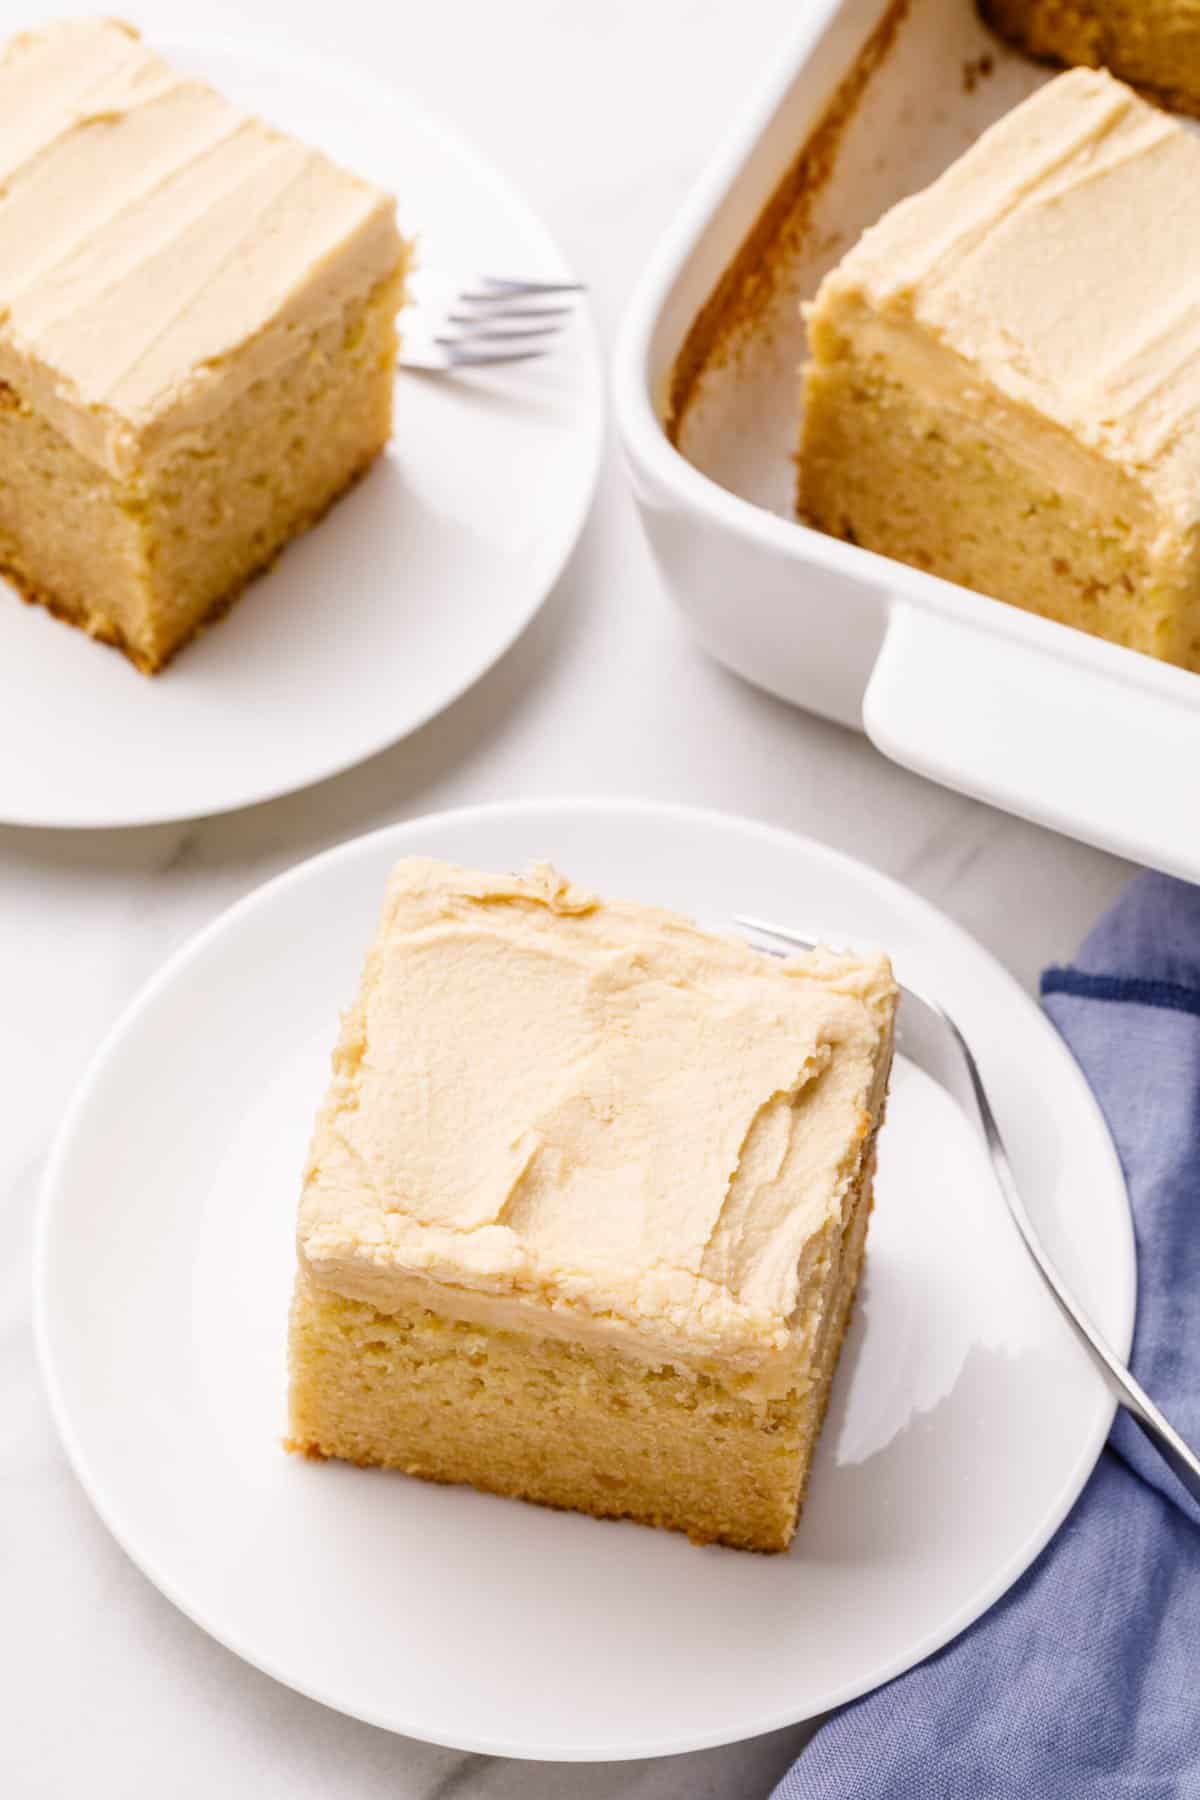 serving of peanut butter cake with peanut butter frosting served on a white round plate with a silver fork